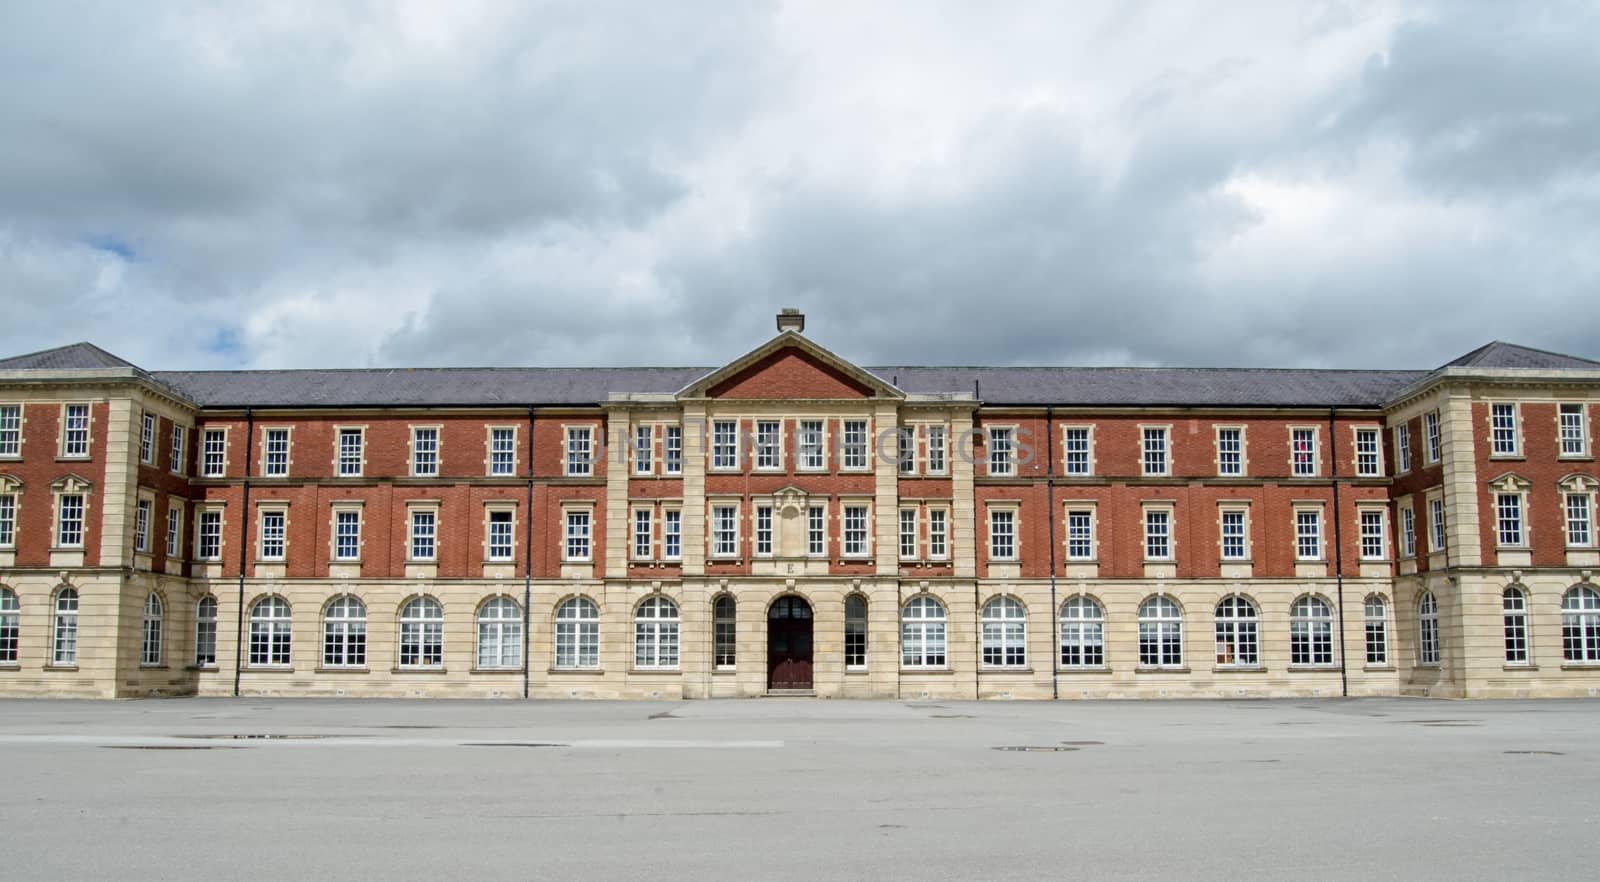 New College buildings, Sandhurst Military Academy, Berkshire by BasPhoto